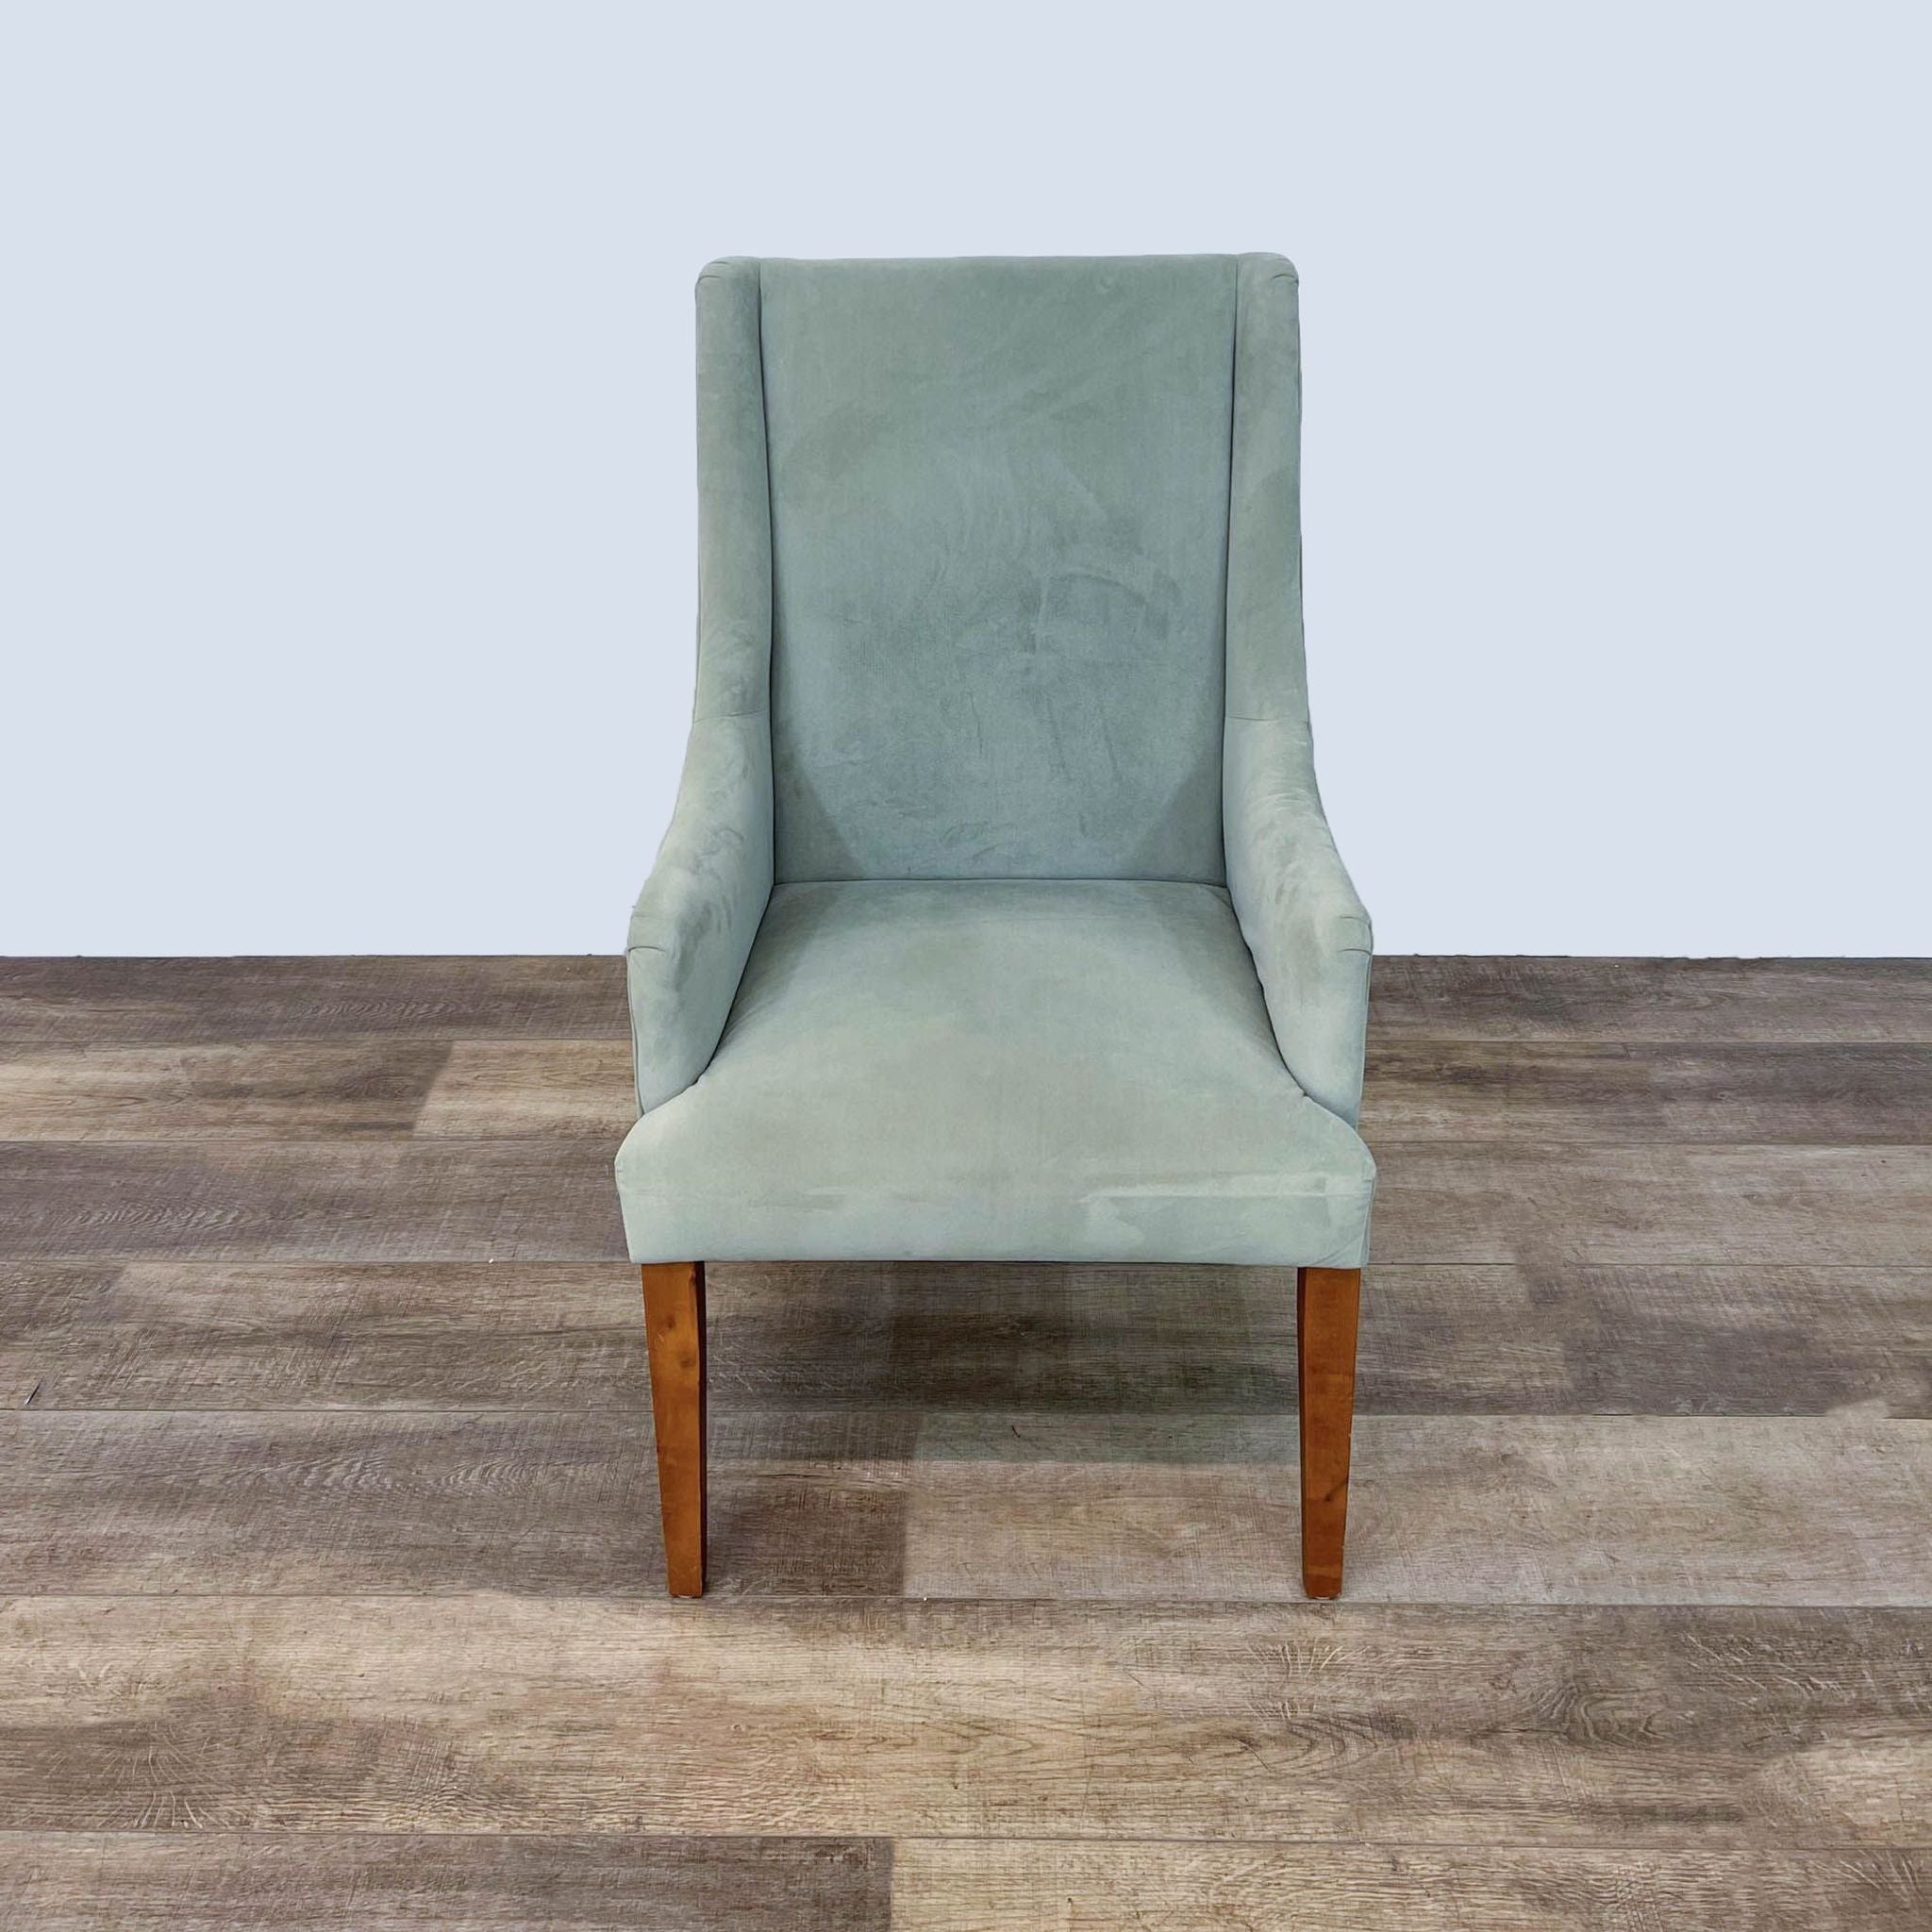 Contemporary World Market side chair with sloped arms, soft fabric upholstery, and tapered wooden legs, shown from the front.